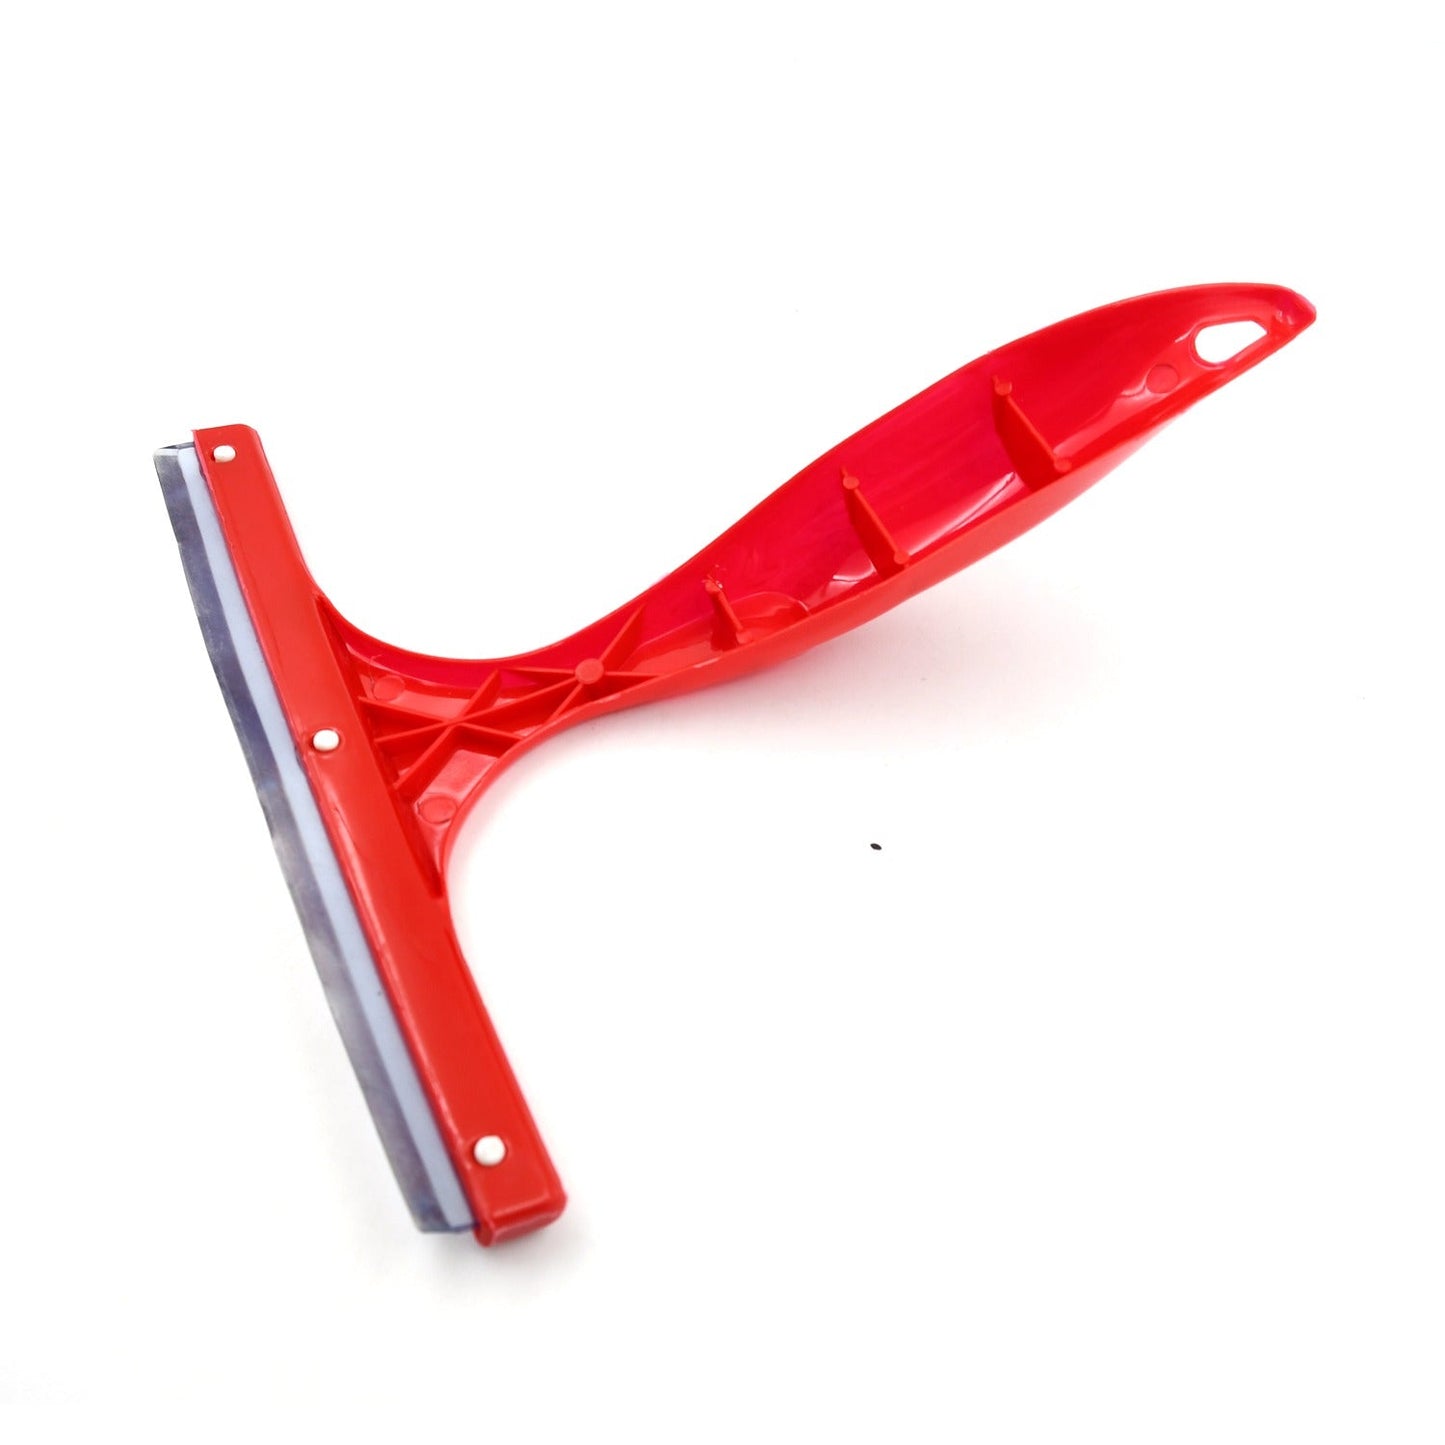 Car Mirror Wiper Used For All Kinds Of Cars And Vehicles For Cleaning And Wiping Off Mirror Etc. (1Pc)